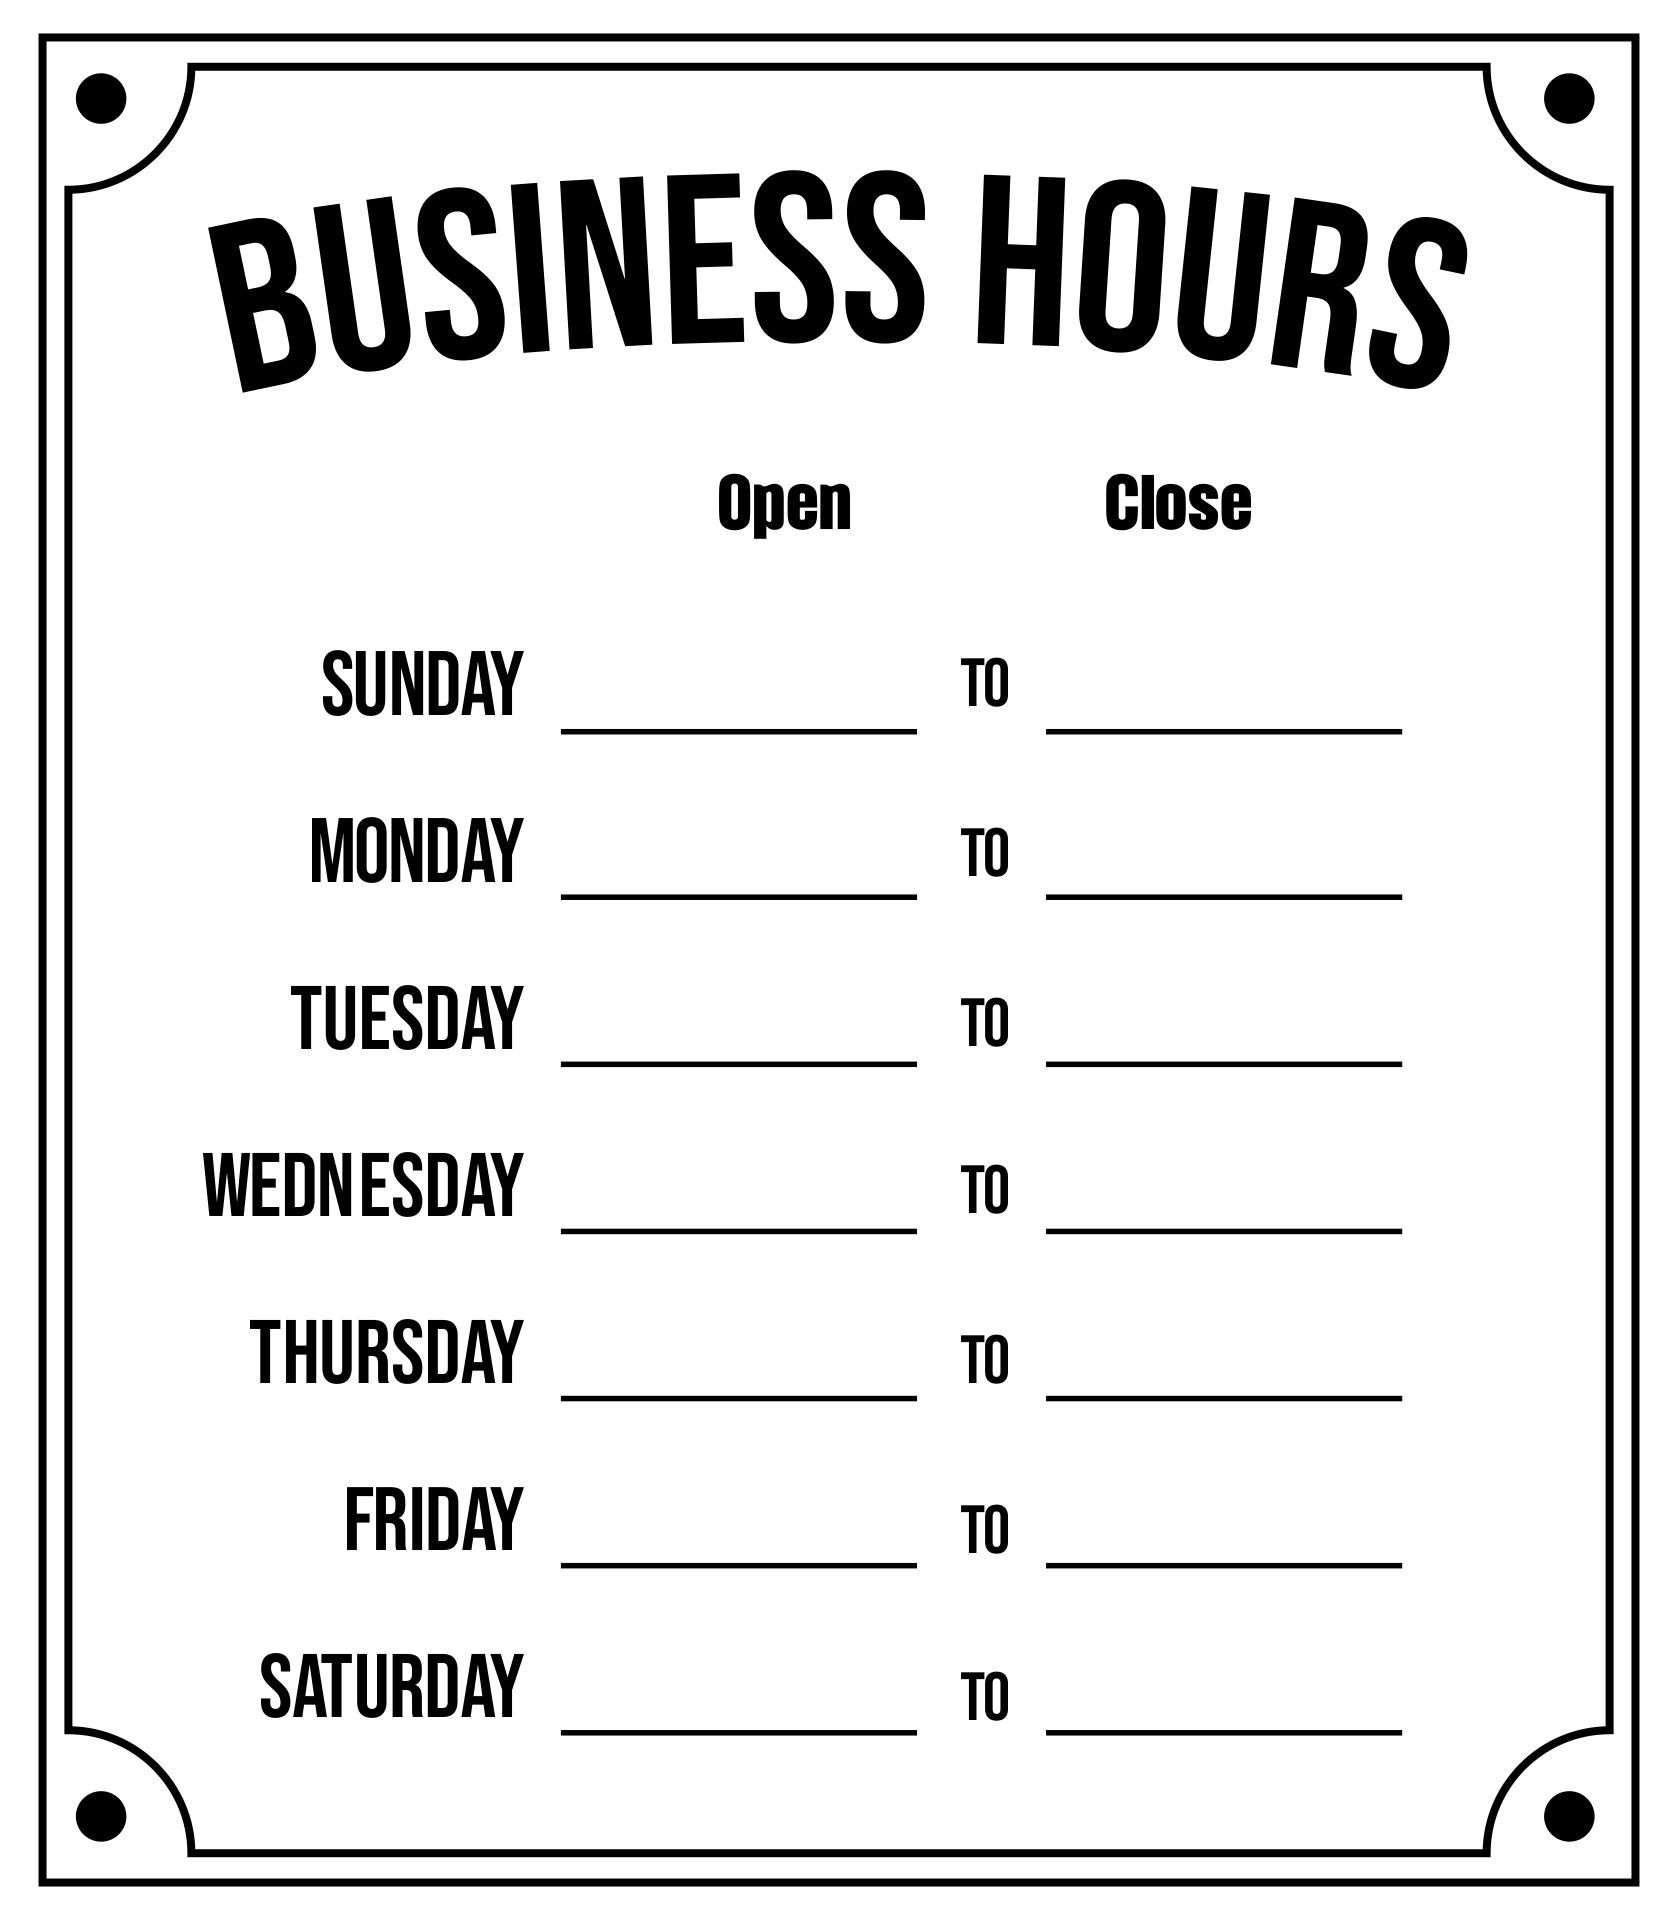 Free Printable Business Hours Sign Template_21856